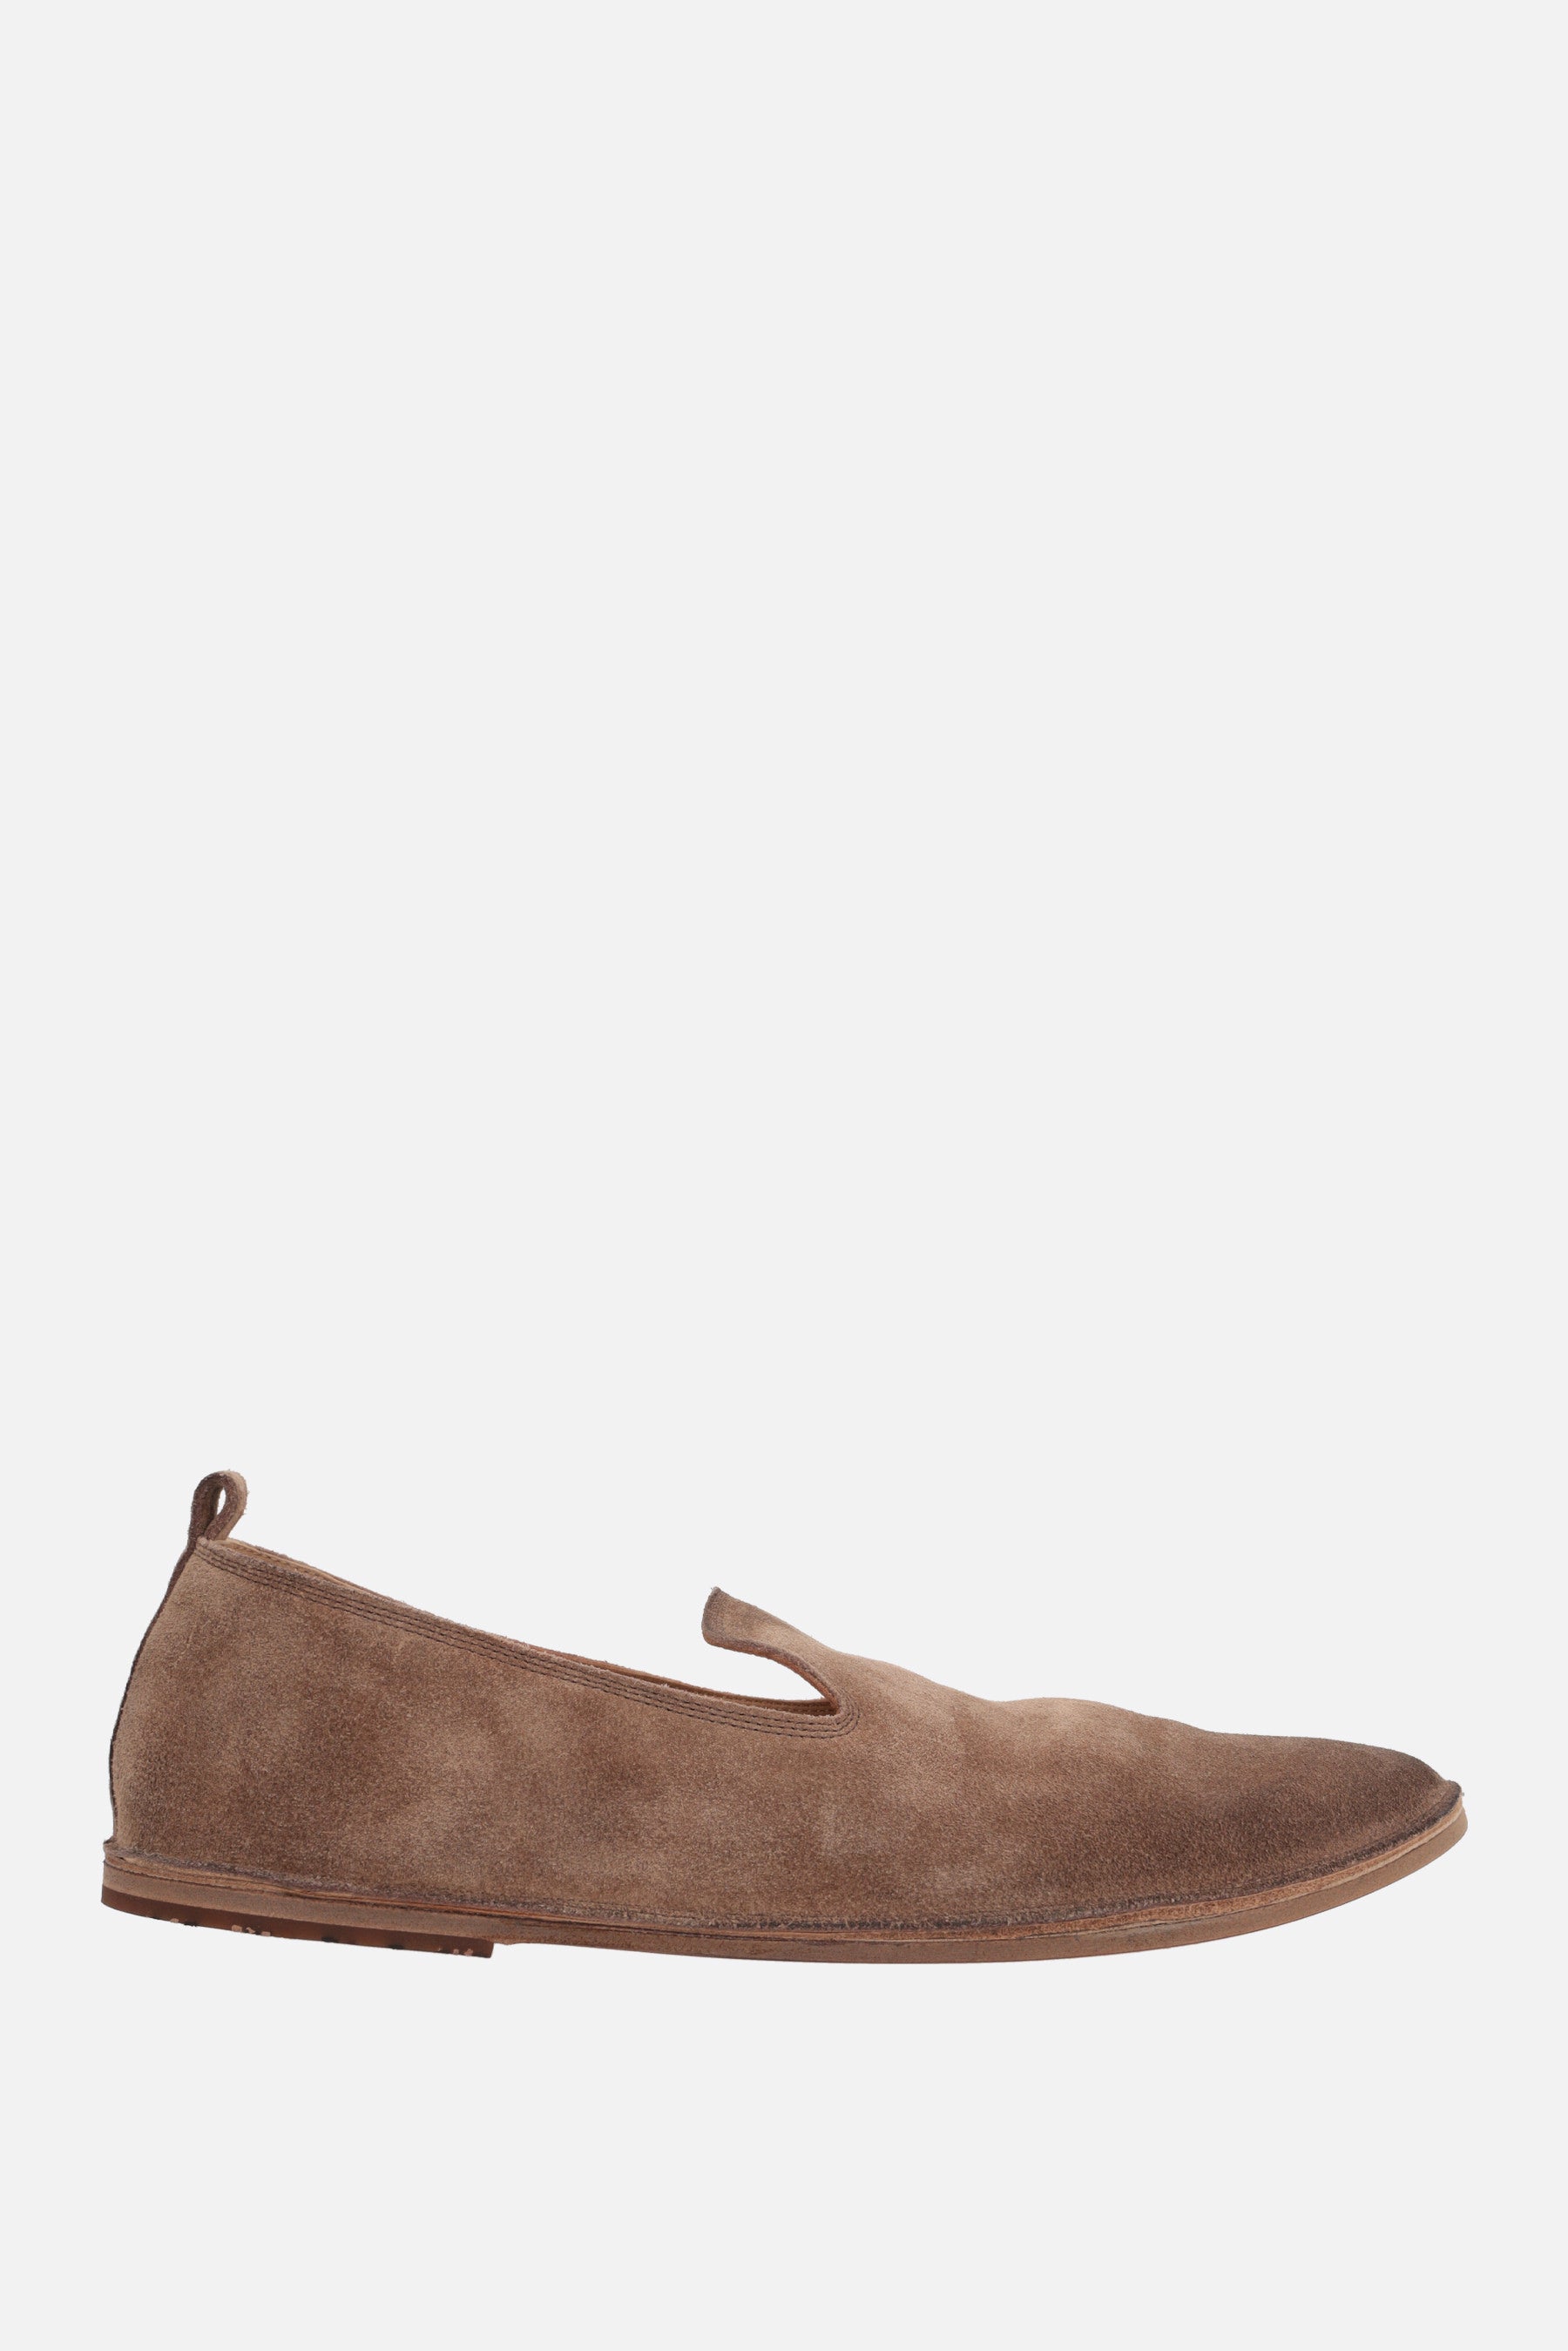 Strasacco suede slippers